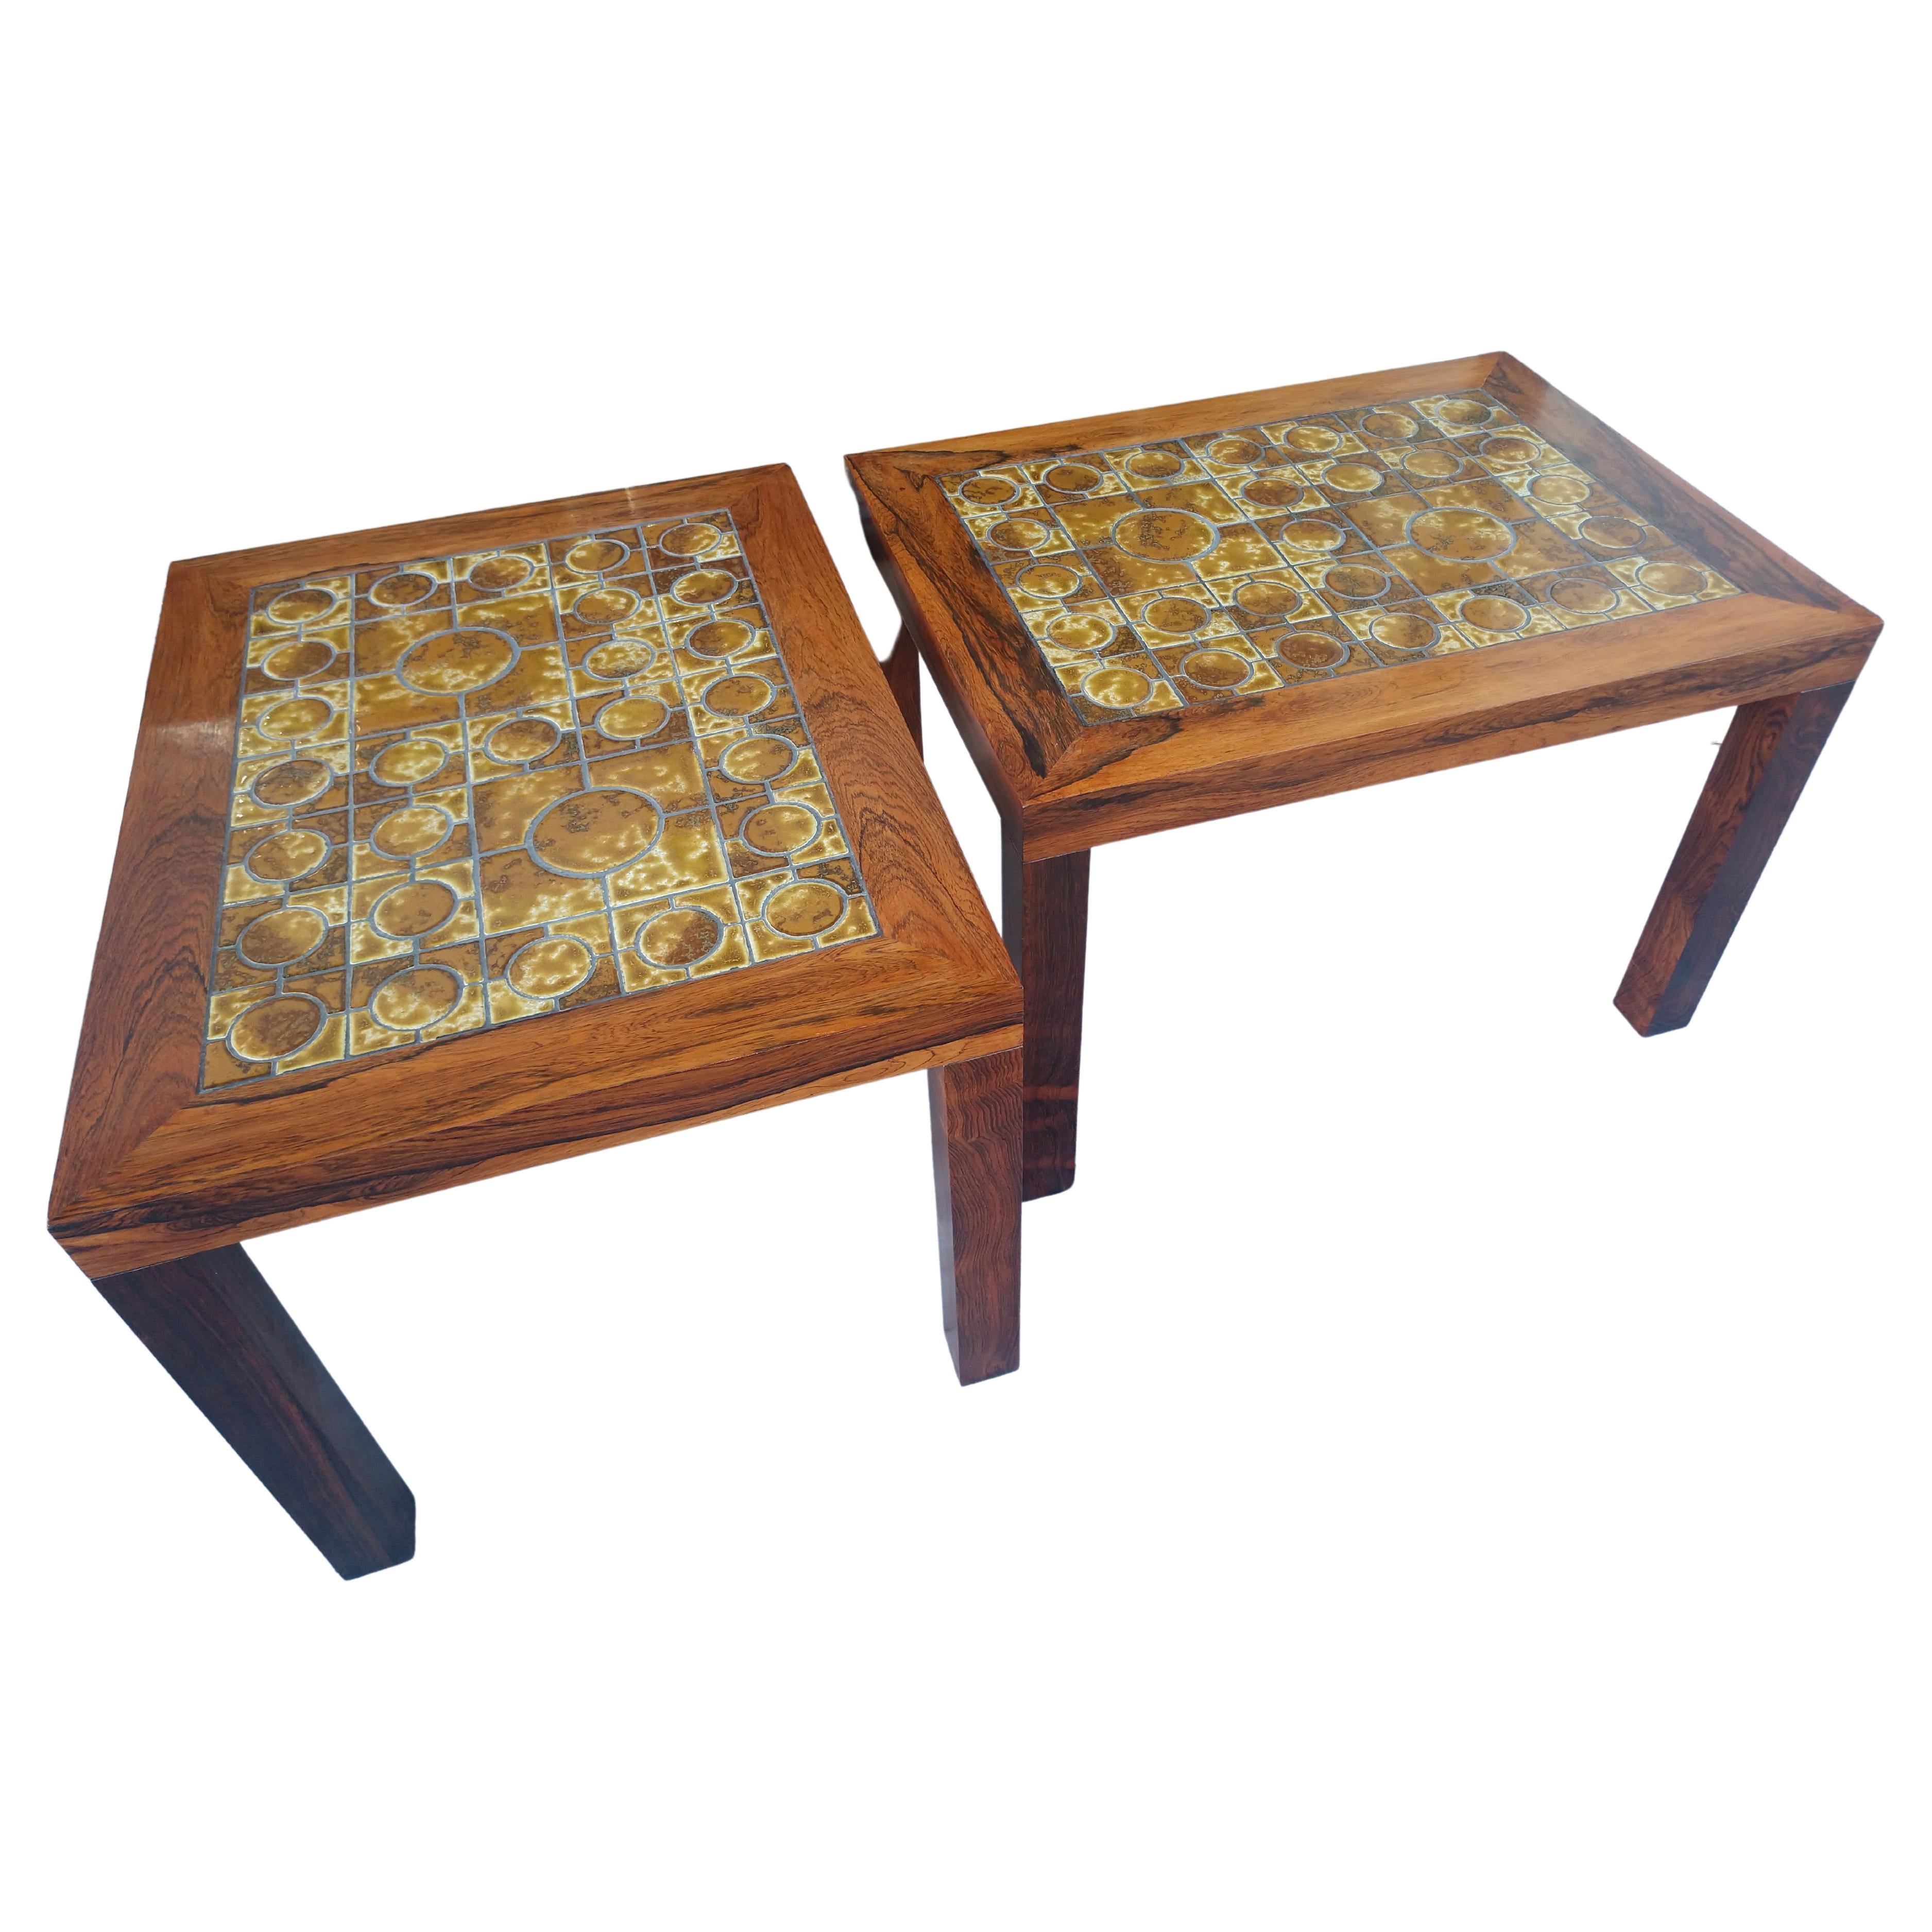 Pair of Mid Century Danish Modern Rosewood End Tables with Inset Ceramic Tile